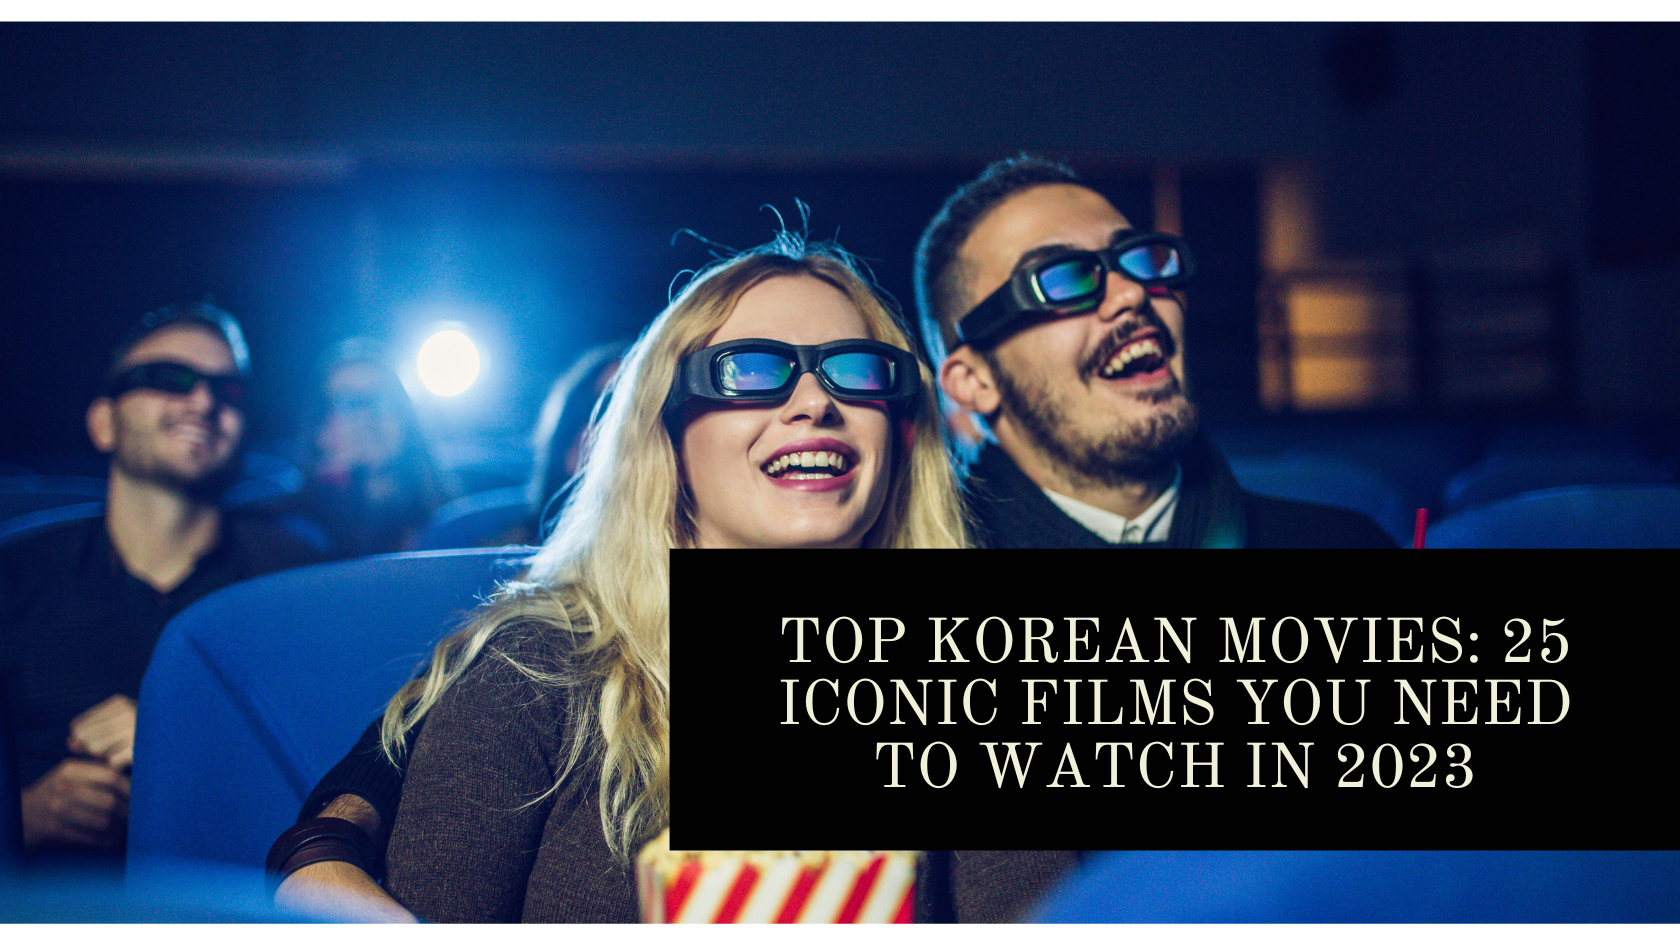 Top Korean Movies: 25 Iconic Films You Need to Watch in 2023